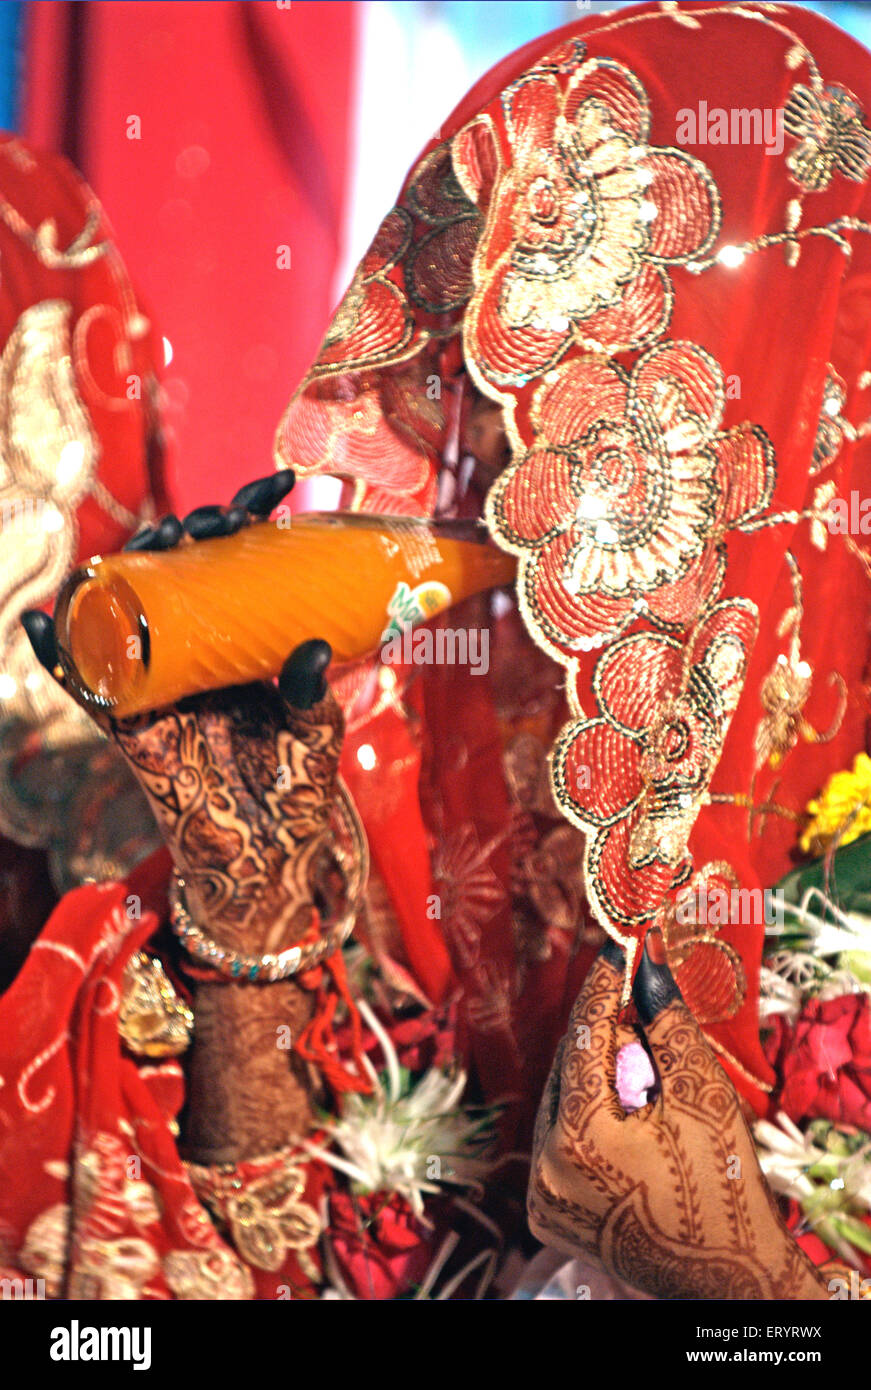 Muslim bride in veil drinking soft drink in marriage ceremony 15 June 2009 Stock Photo